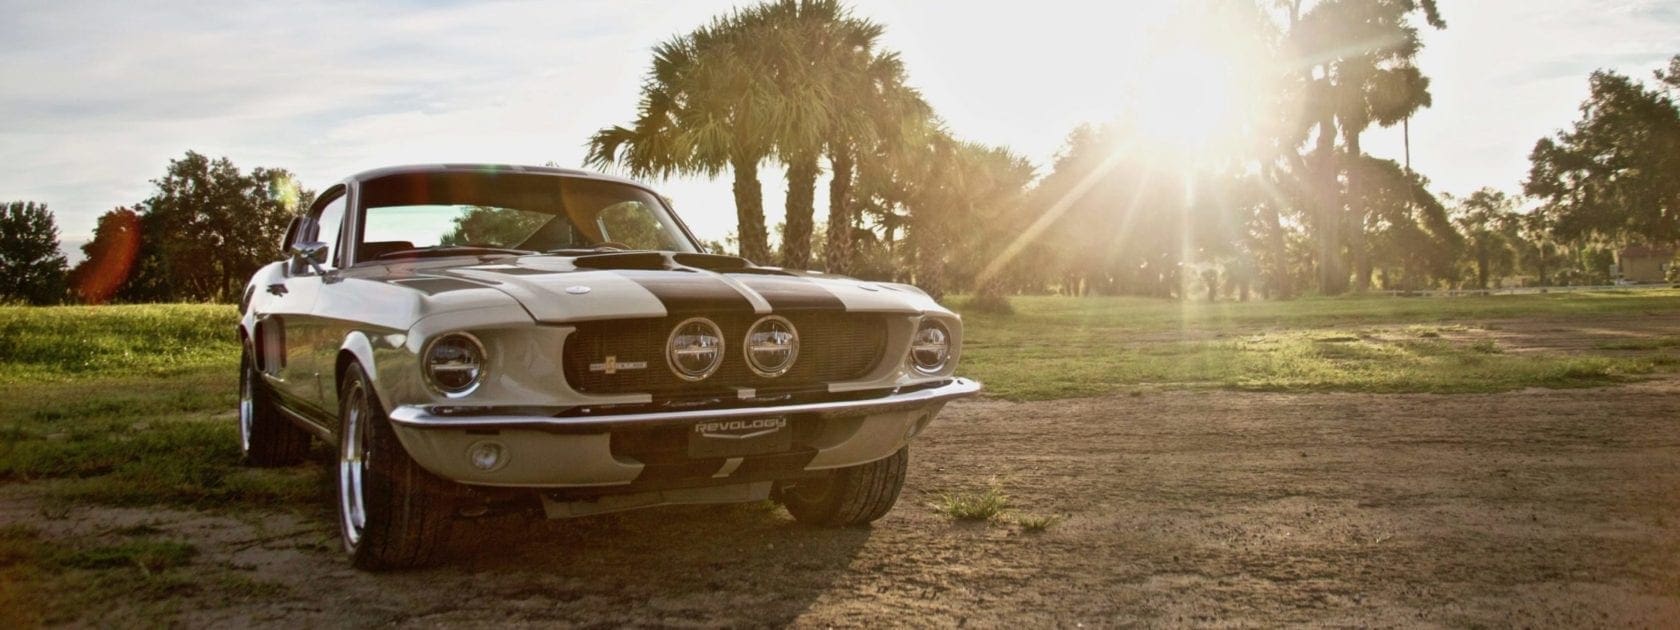 Revology wants to sell you a post-modern interpretation of the original Mustang